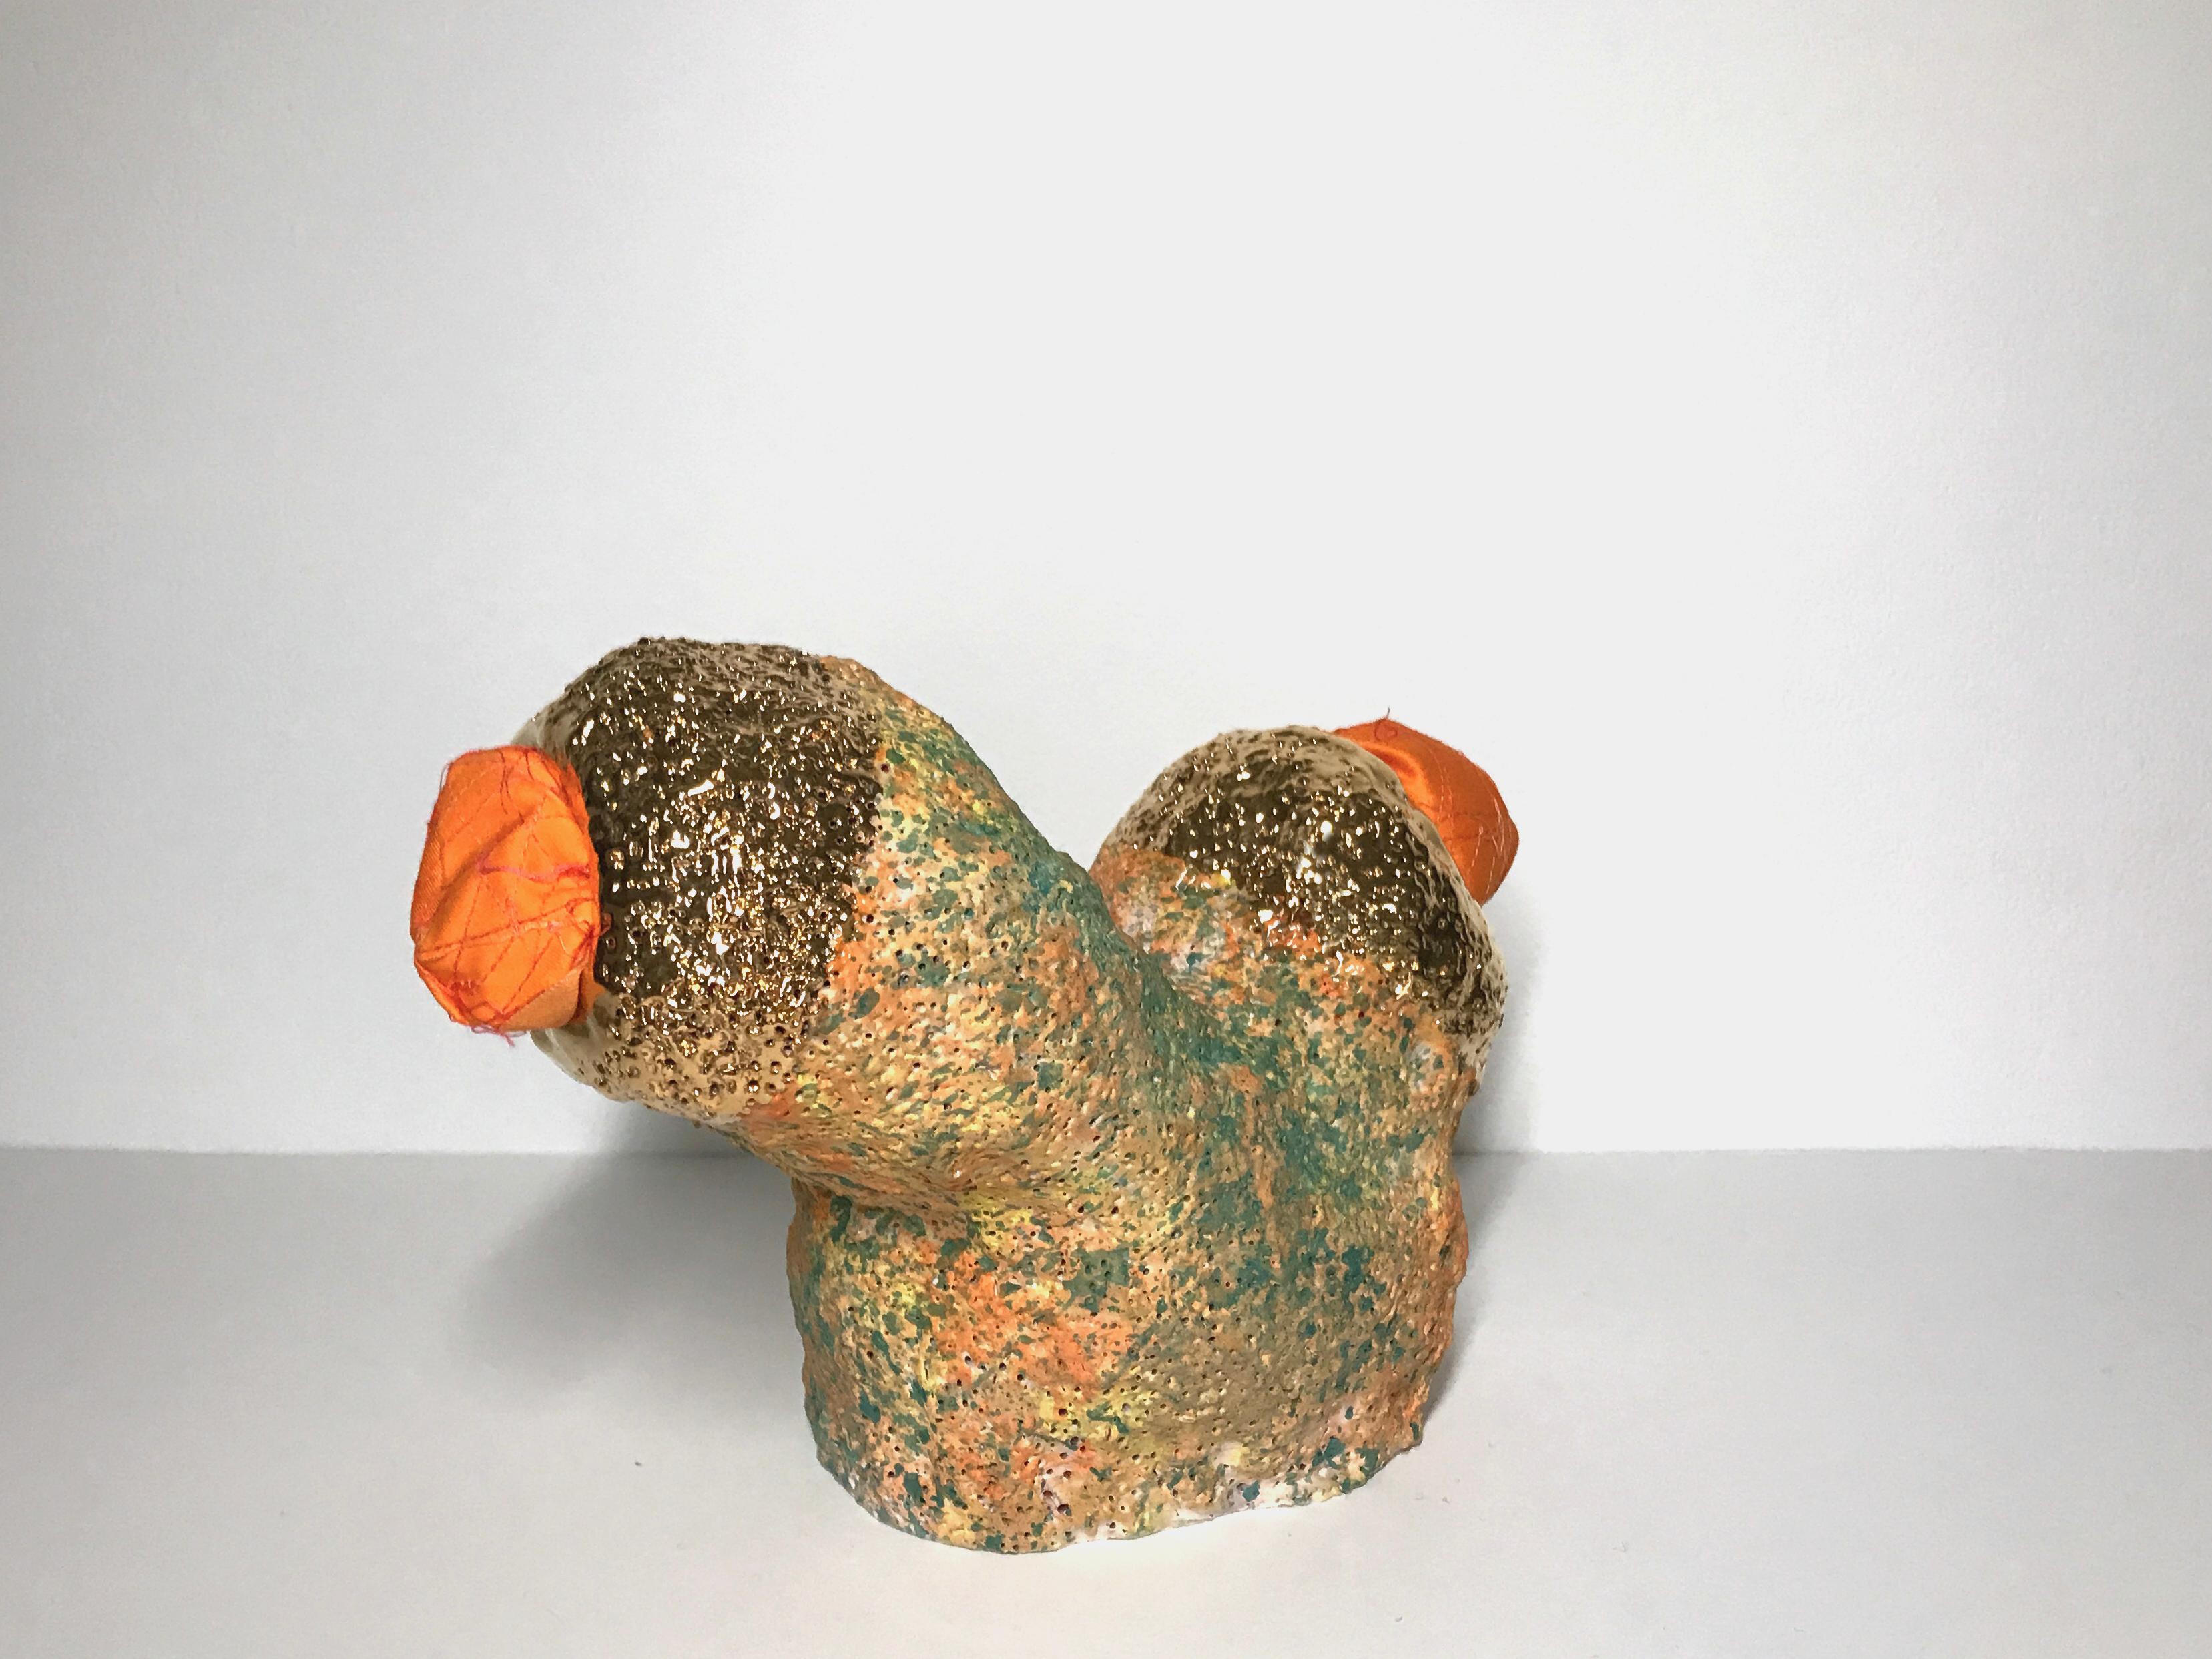 This is part of a collection of ceramics, textiles, and drawings by Ak Jansen which comprise his first solo show in New York City. Born in the Netherlands, Jansen’s work occupies queerness on both poetic and political terms, and honors queer